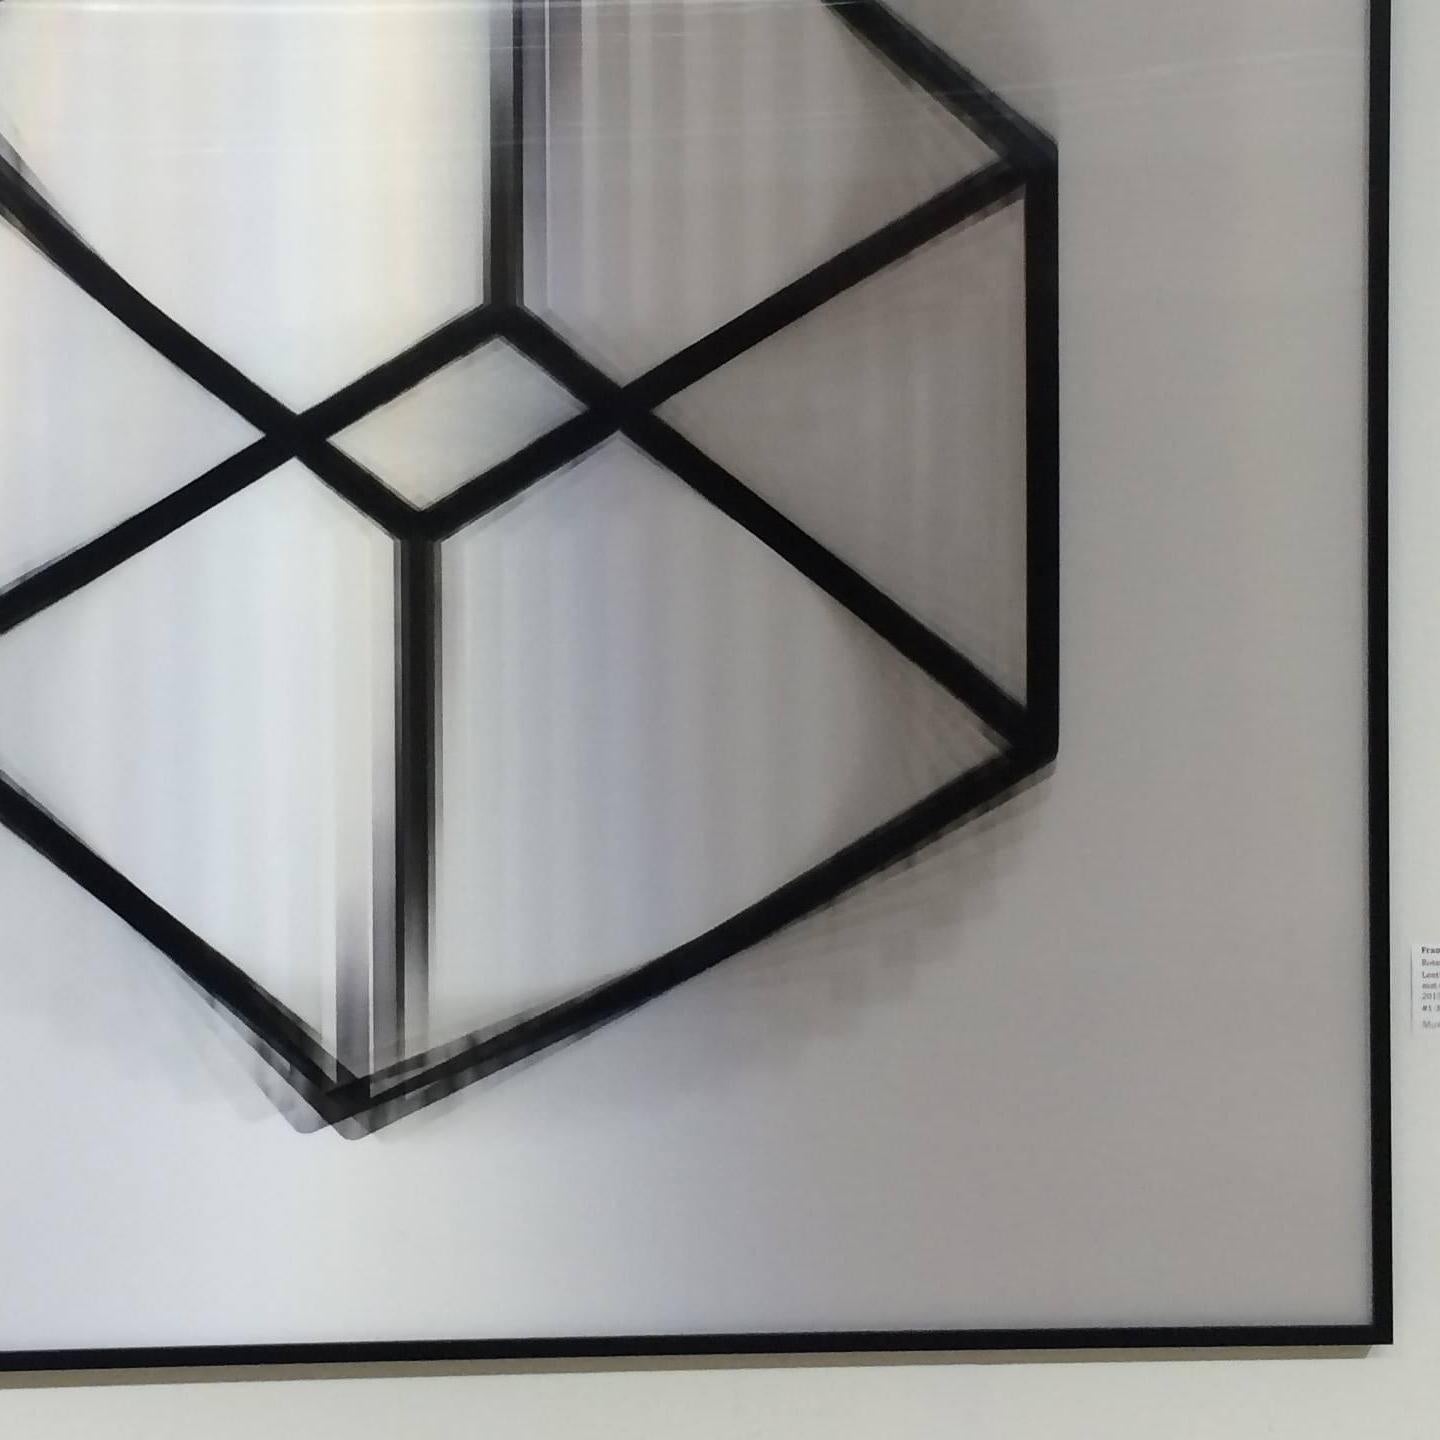 Rotation II- abstract geometric black and white lenticular print rotating cube - Contemporary Mixed Media Art by Francois Wunschel